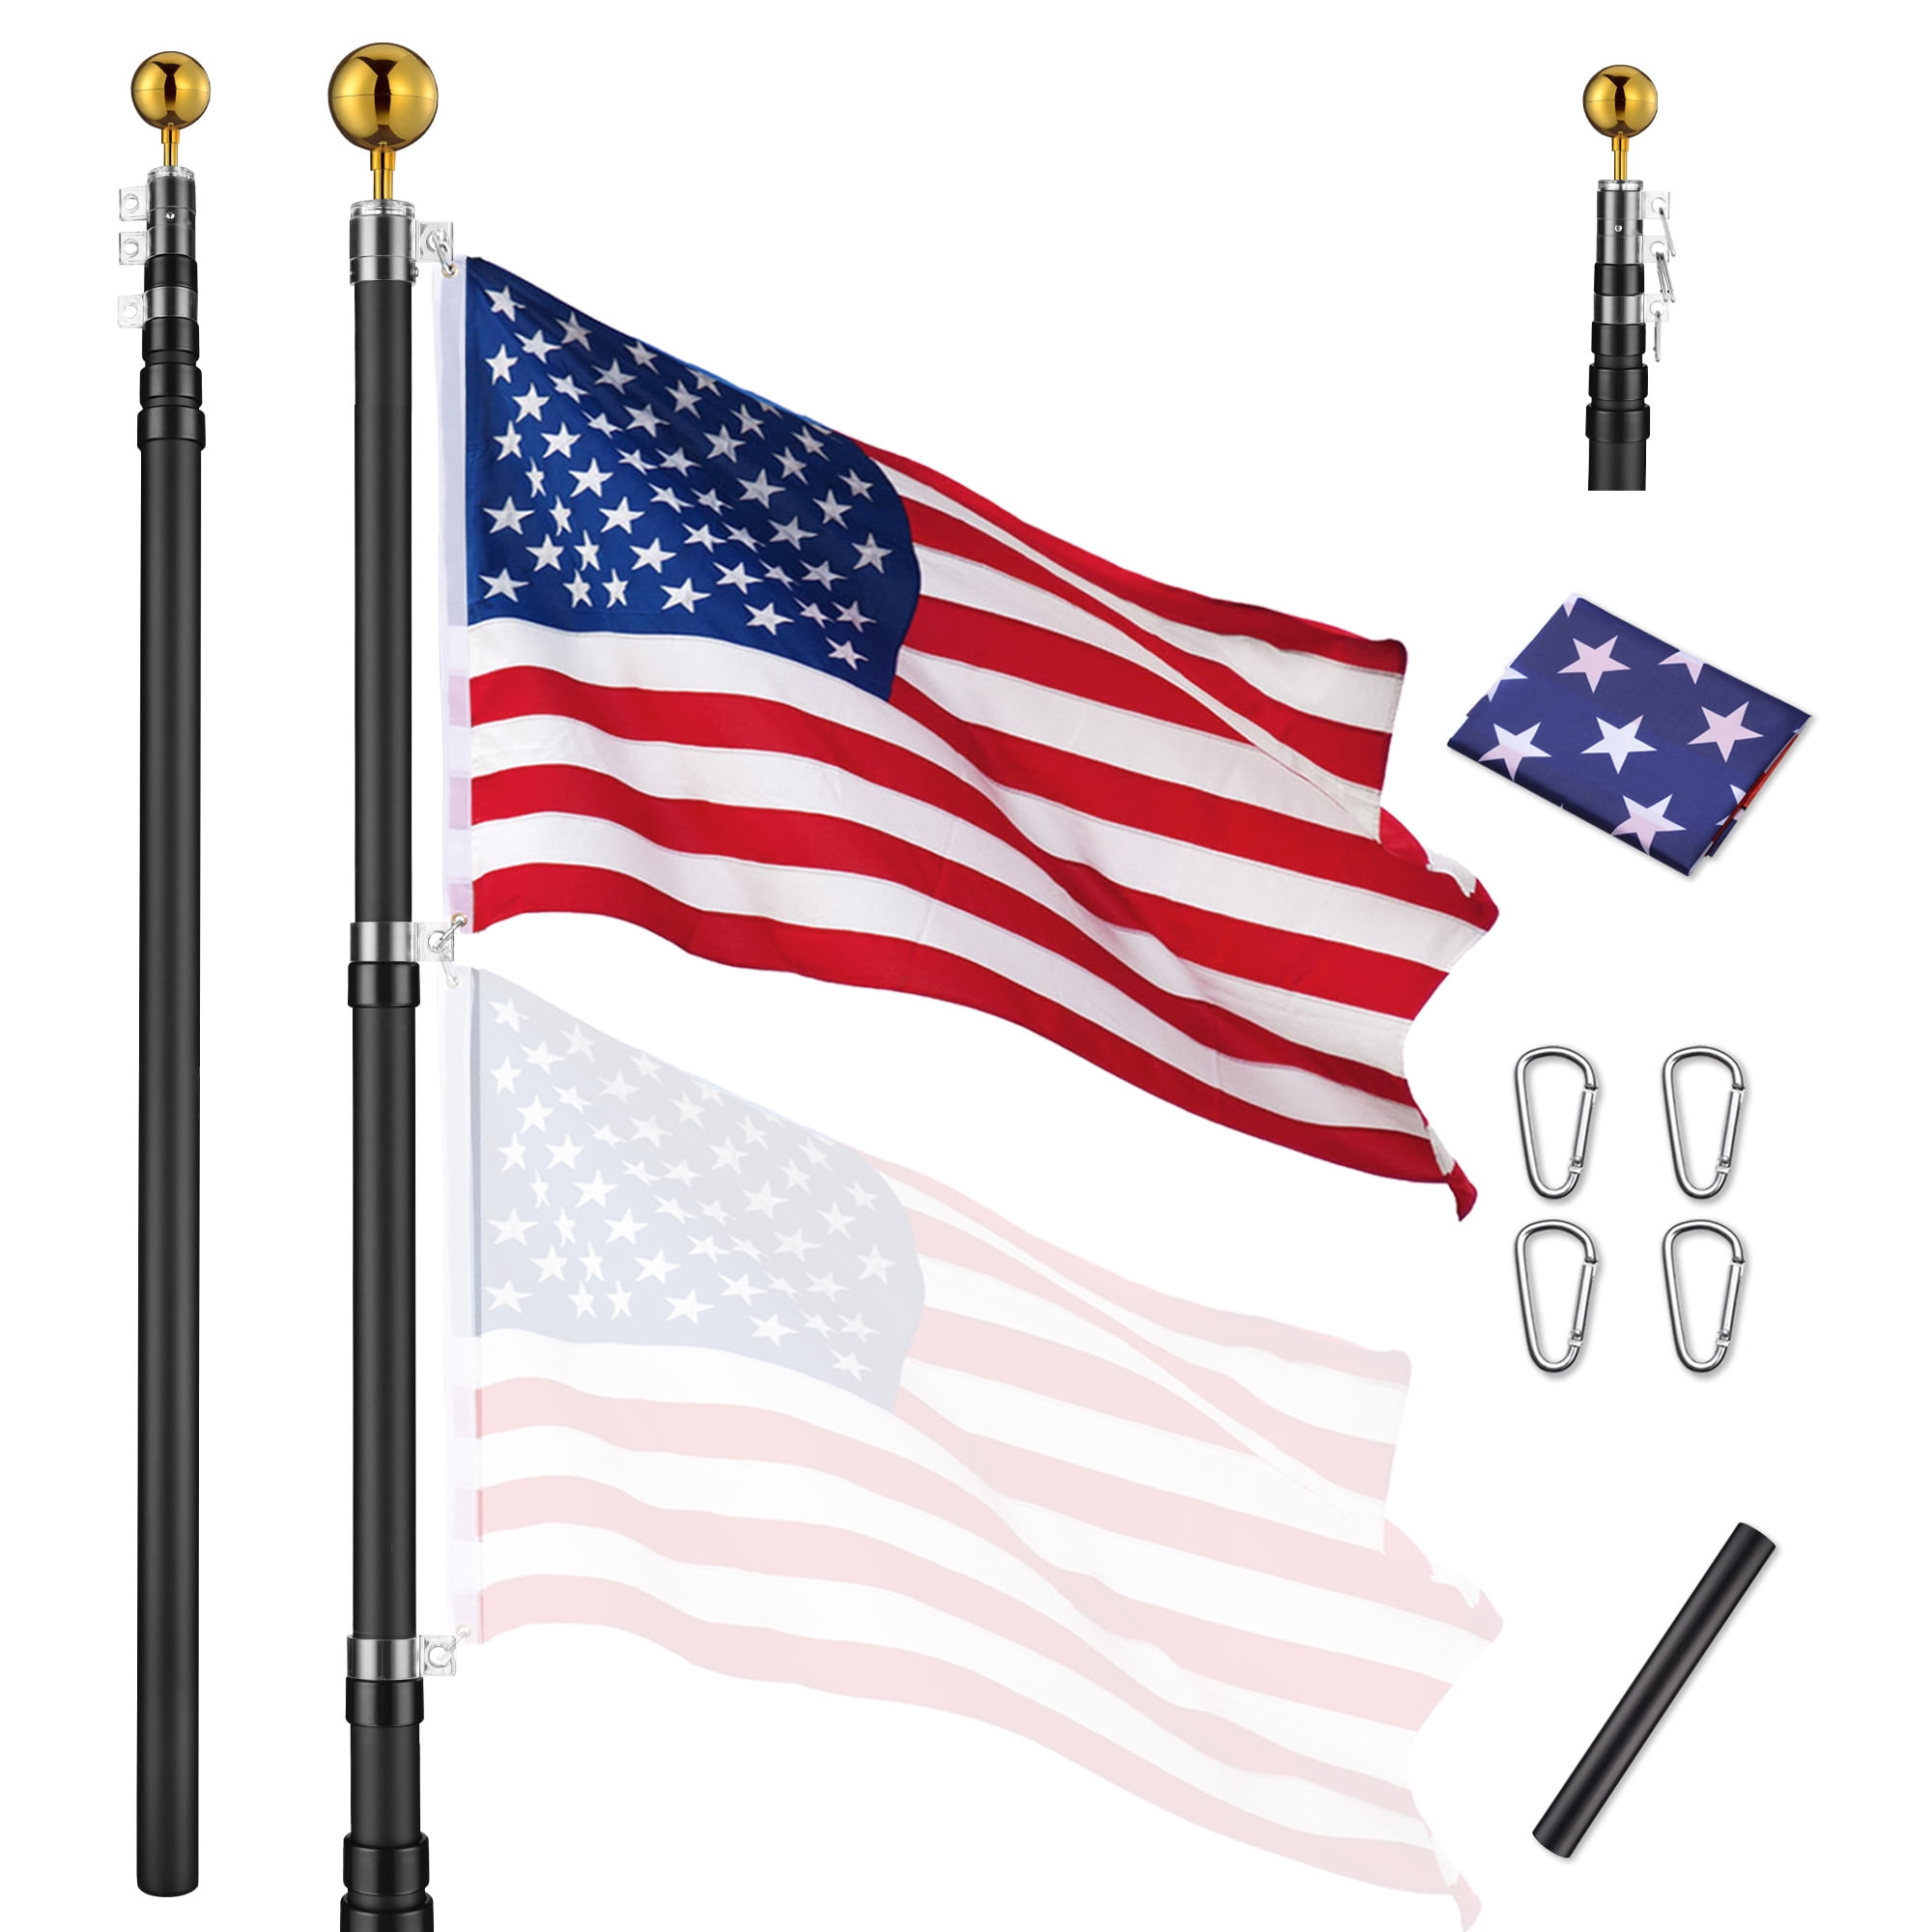 Details about   Aluminum 20' Sectional Flag Pole Kit w/ 3' x 5' US Flag Gold Ball Kit Outdoor 